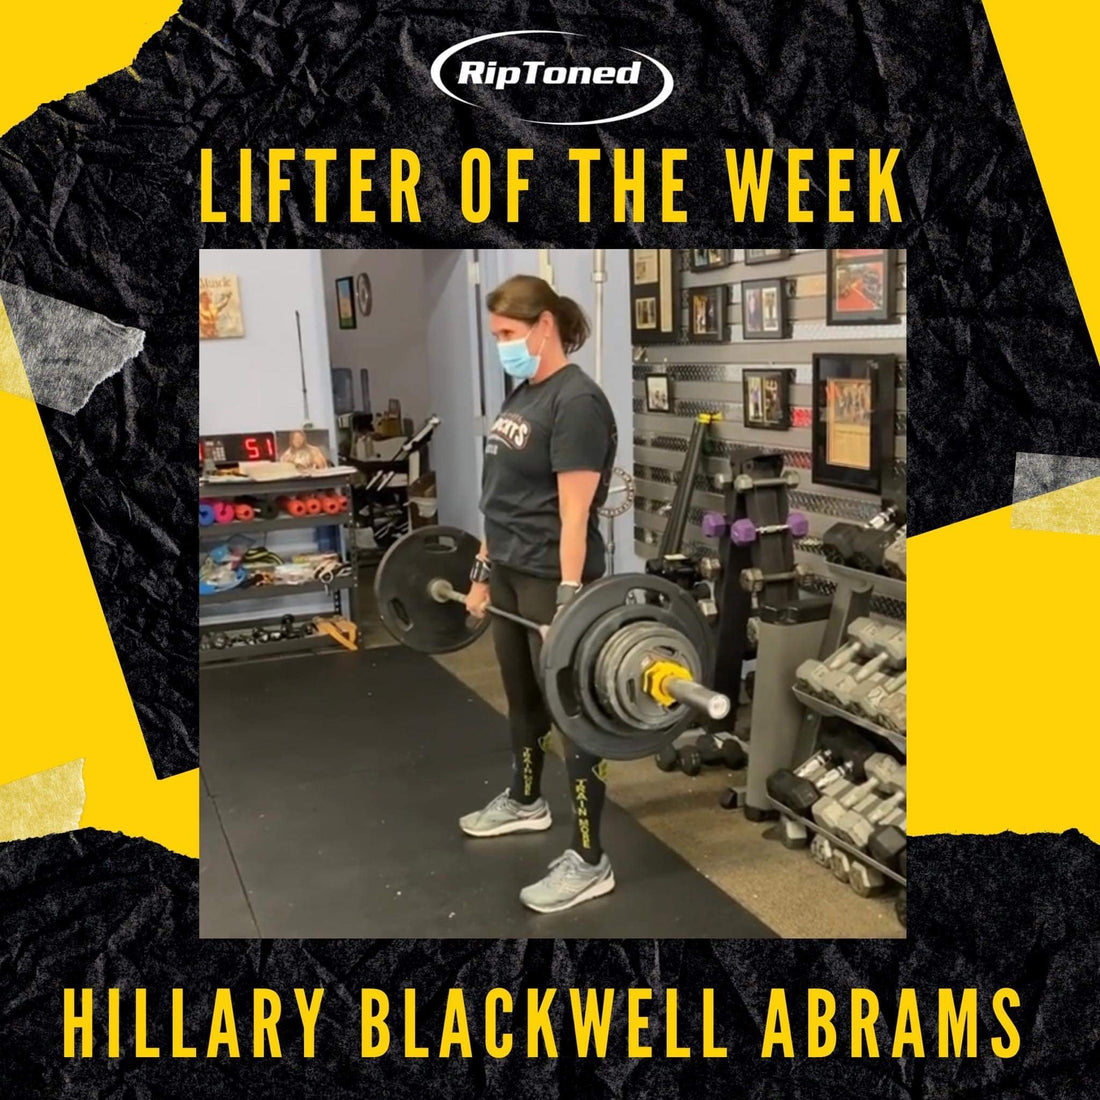 Lifter of the Week - Hillary Blackwell Abrams - Rip Toned